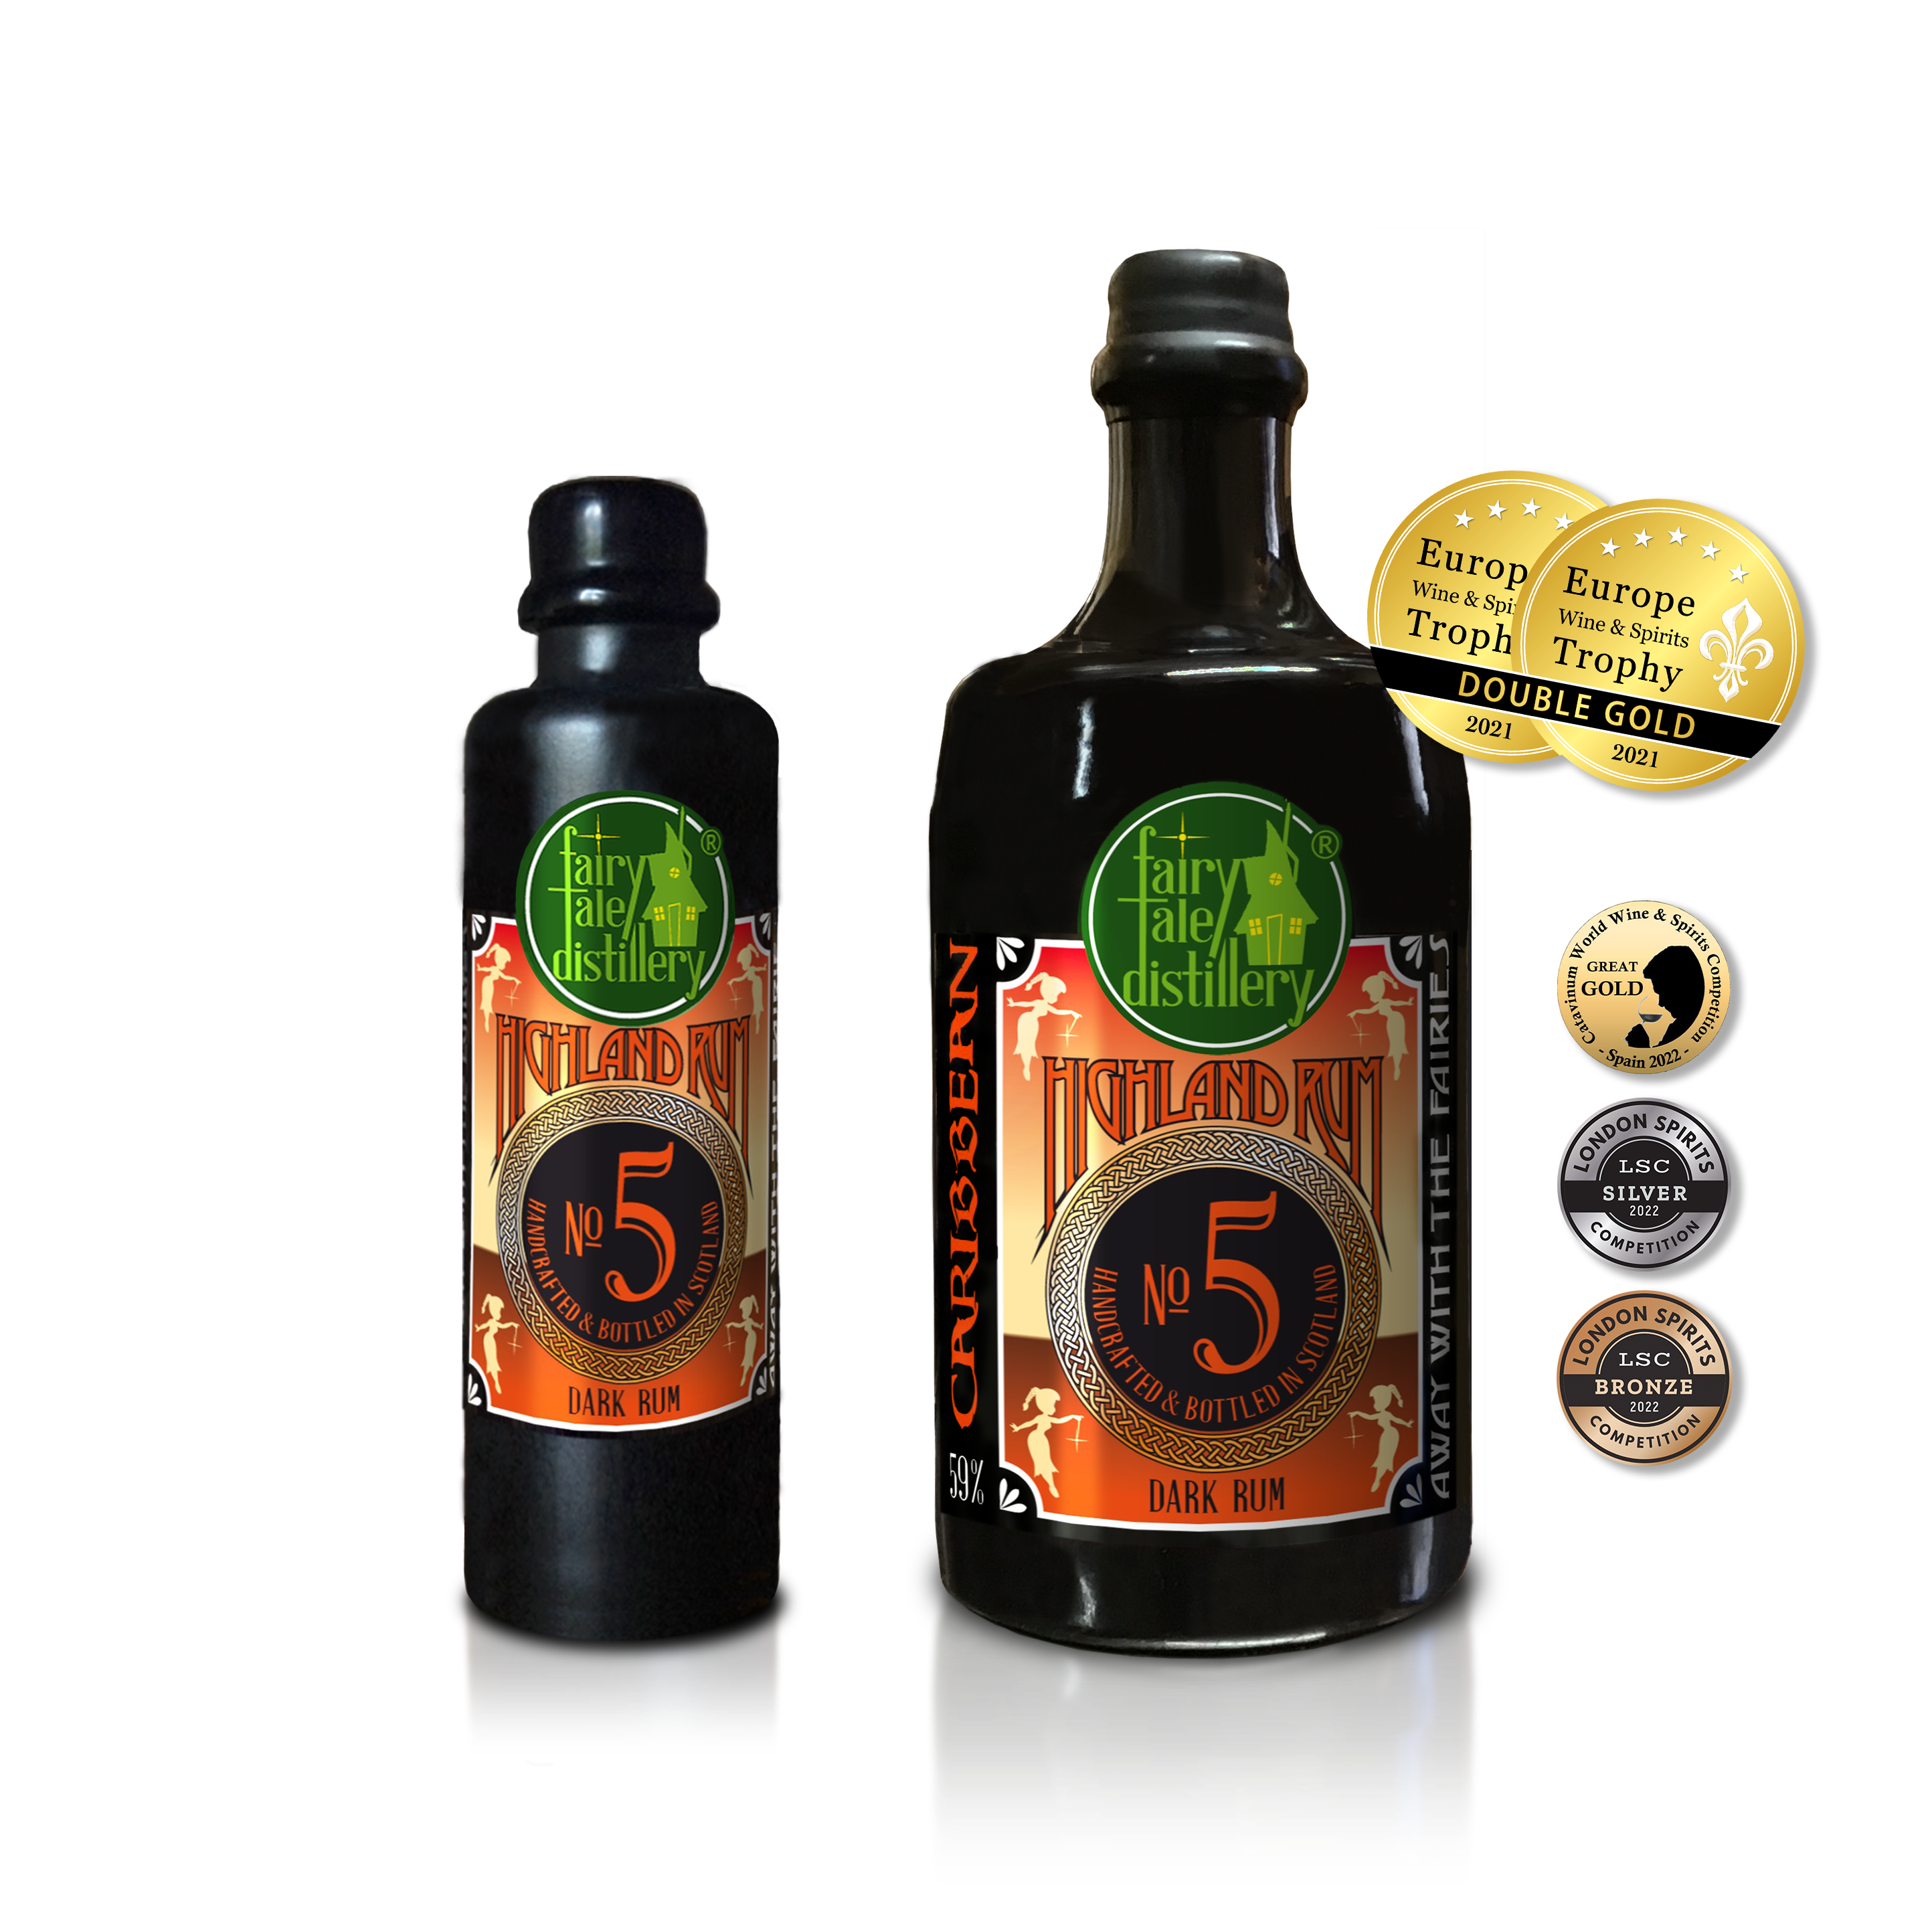 No 5 Dark Rum bottle from Fairytale Distillery with Europe Wine & Spirits Trophy 2021 Double Gold - Catavinum World Wine & Spirits Competition Spain 2022 Great Gold - London Spirits Competition 2022 Silver - London Spirits Competition 2022 Bronze